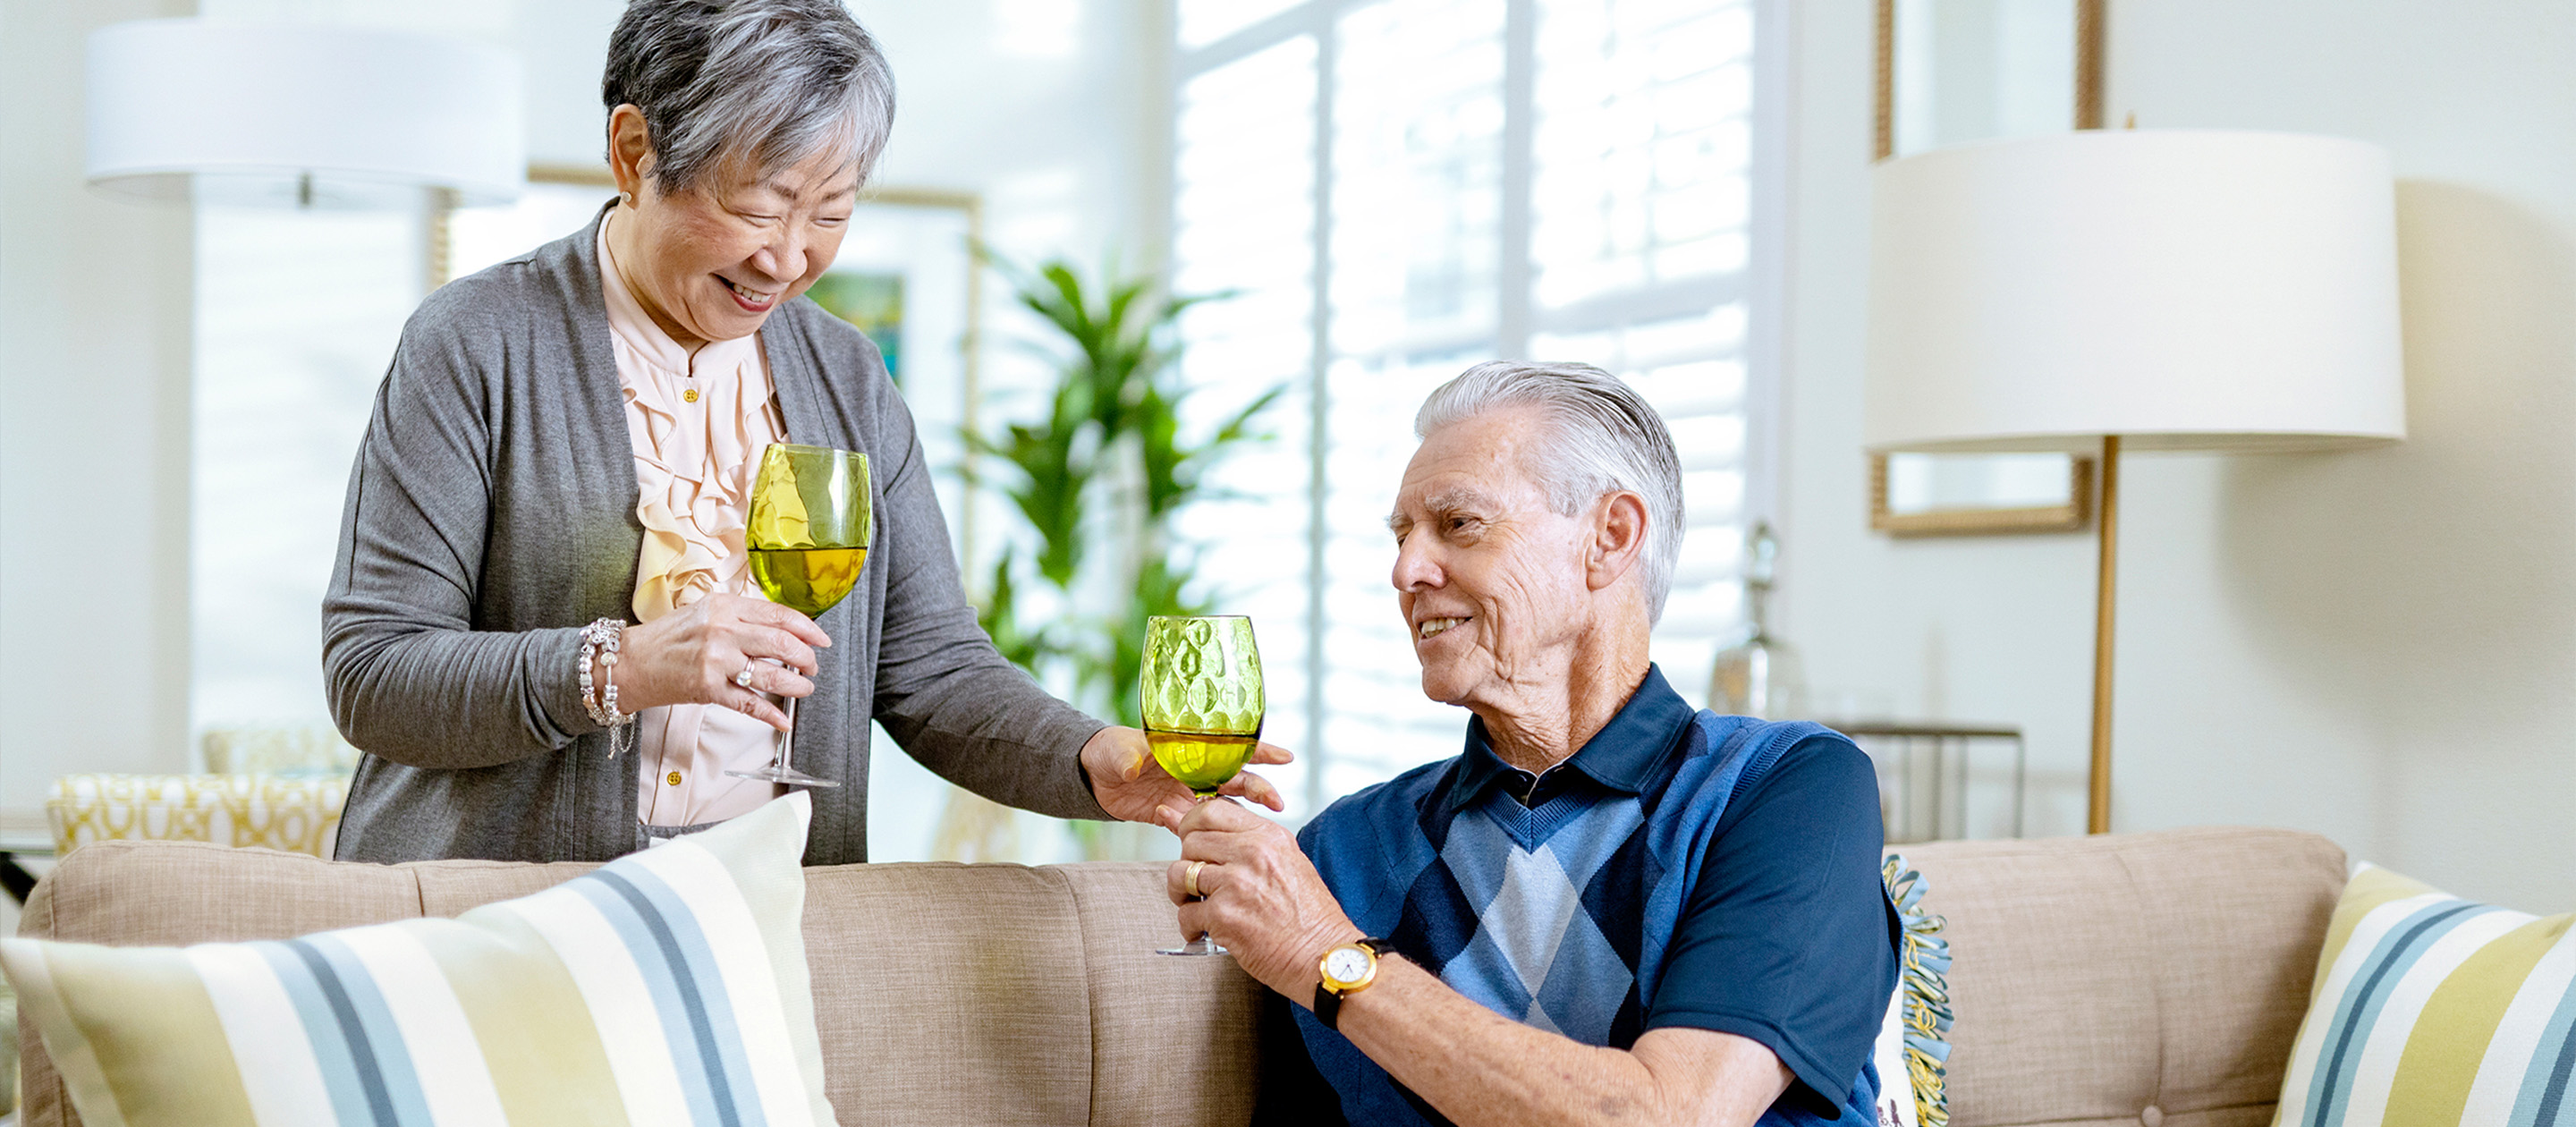 Two senior residents share a glass of wine at a continuing care retirement community